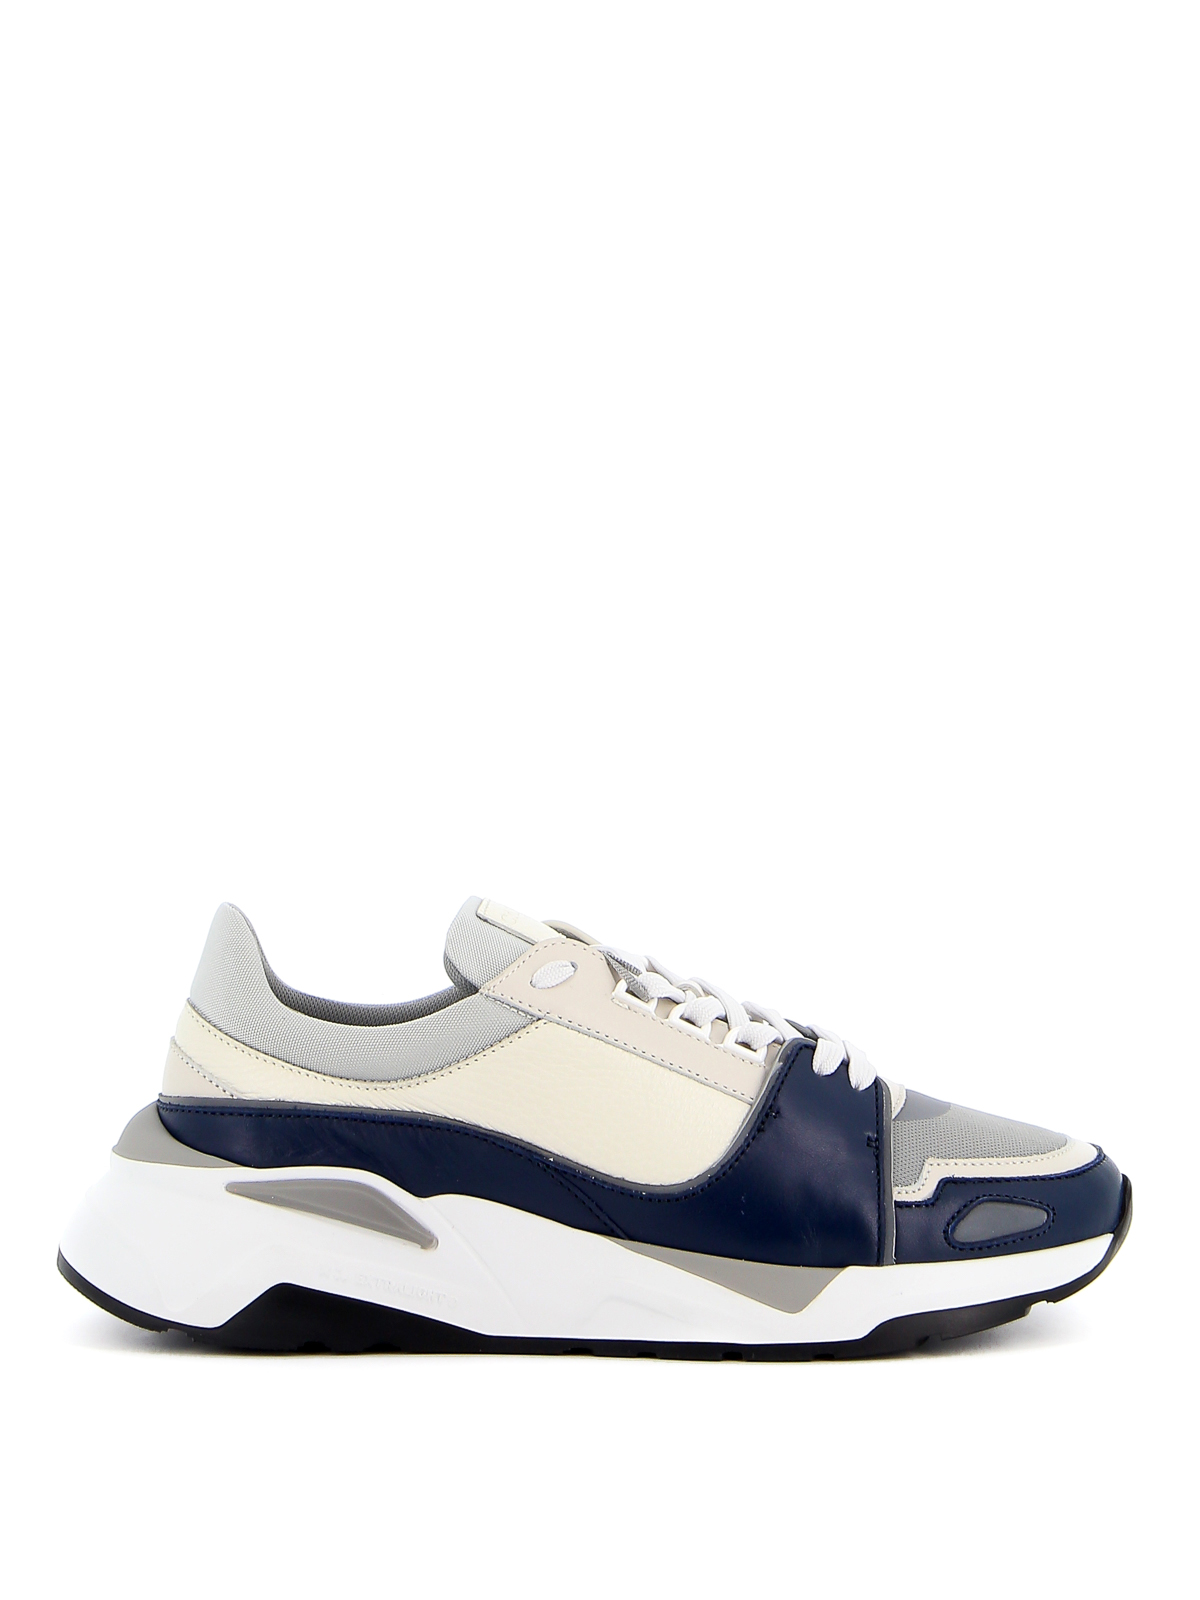 CANALI GRAINY LEATHER LACE-UP SNEAKERS